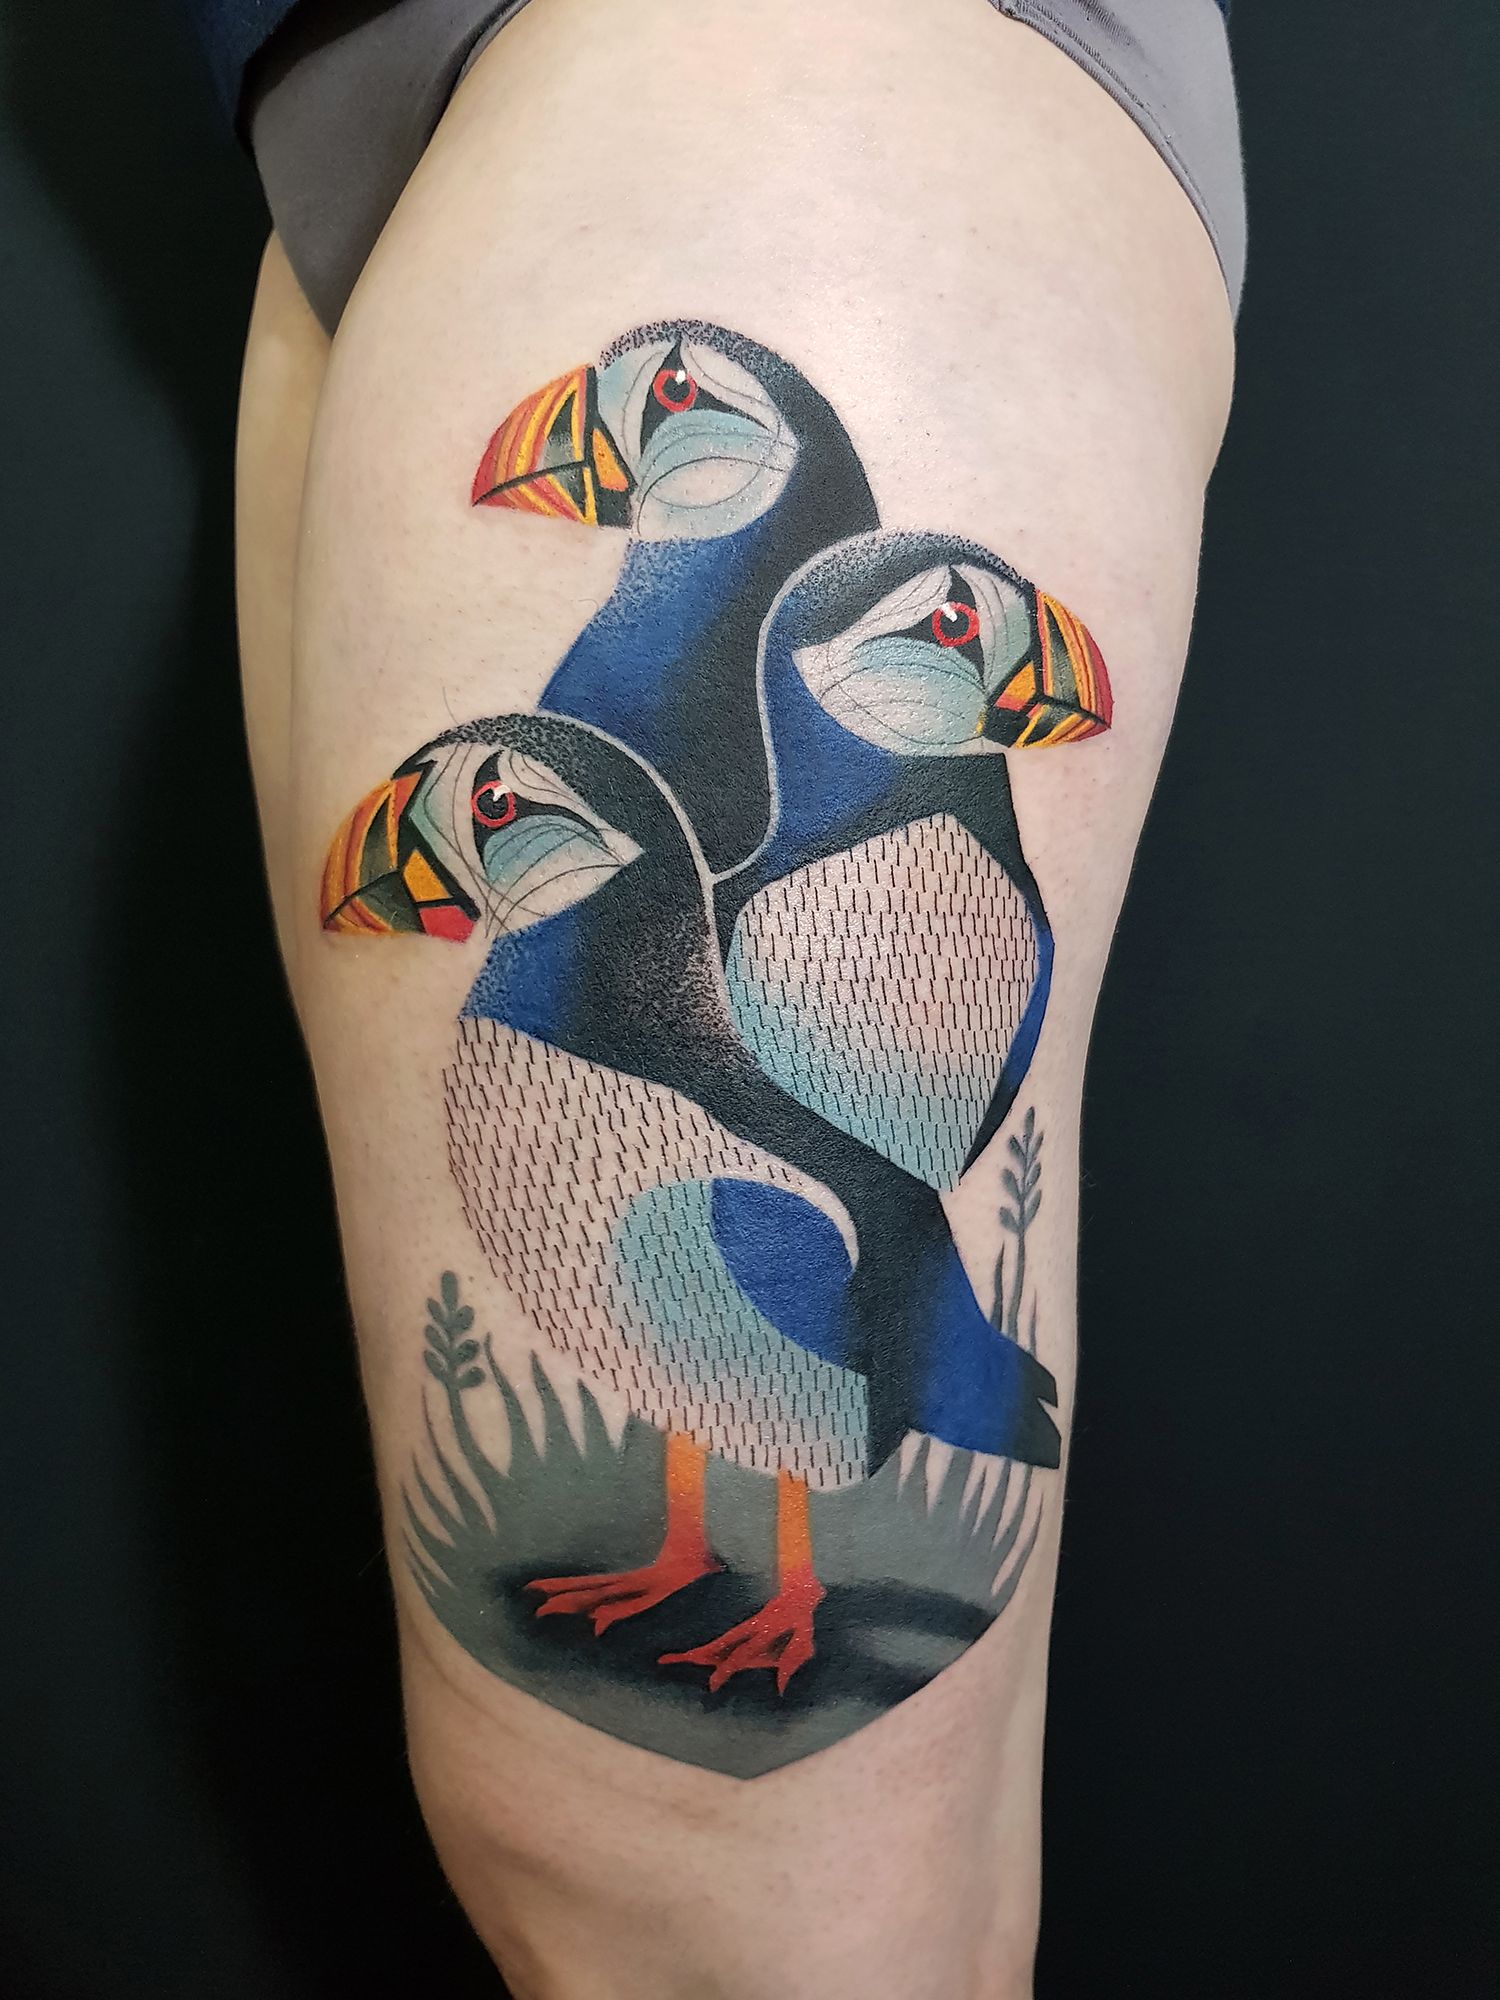 Dotwork style puffin tattoo locatred on the hip.